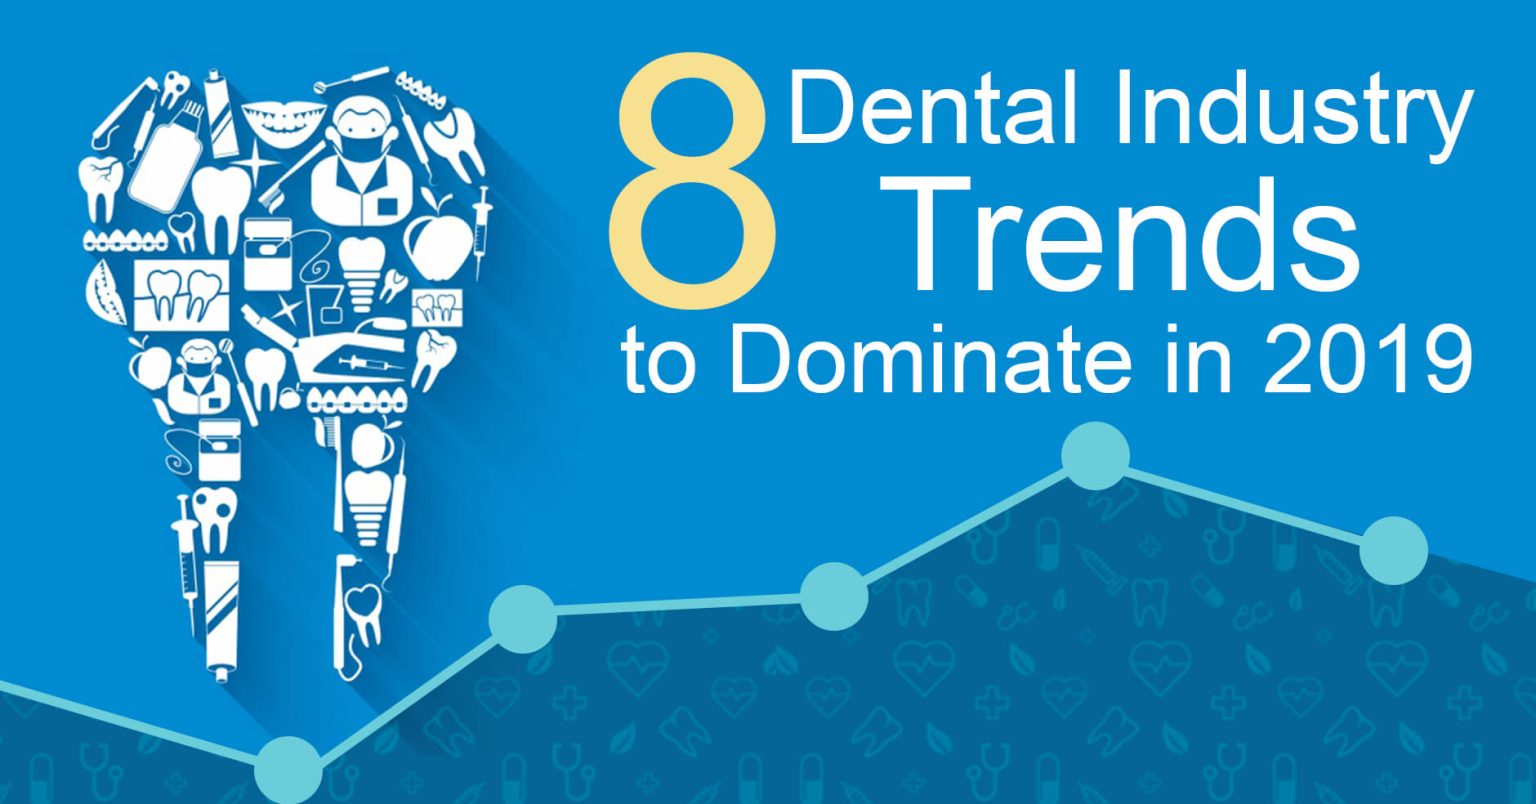 8 Dental Industry Trends to Dominate in 2019